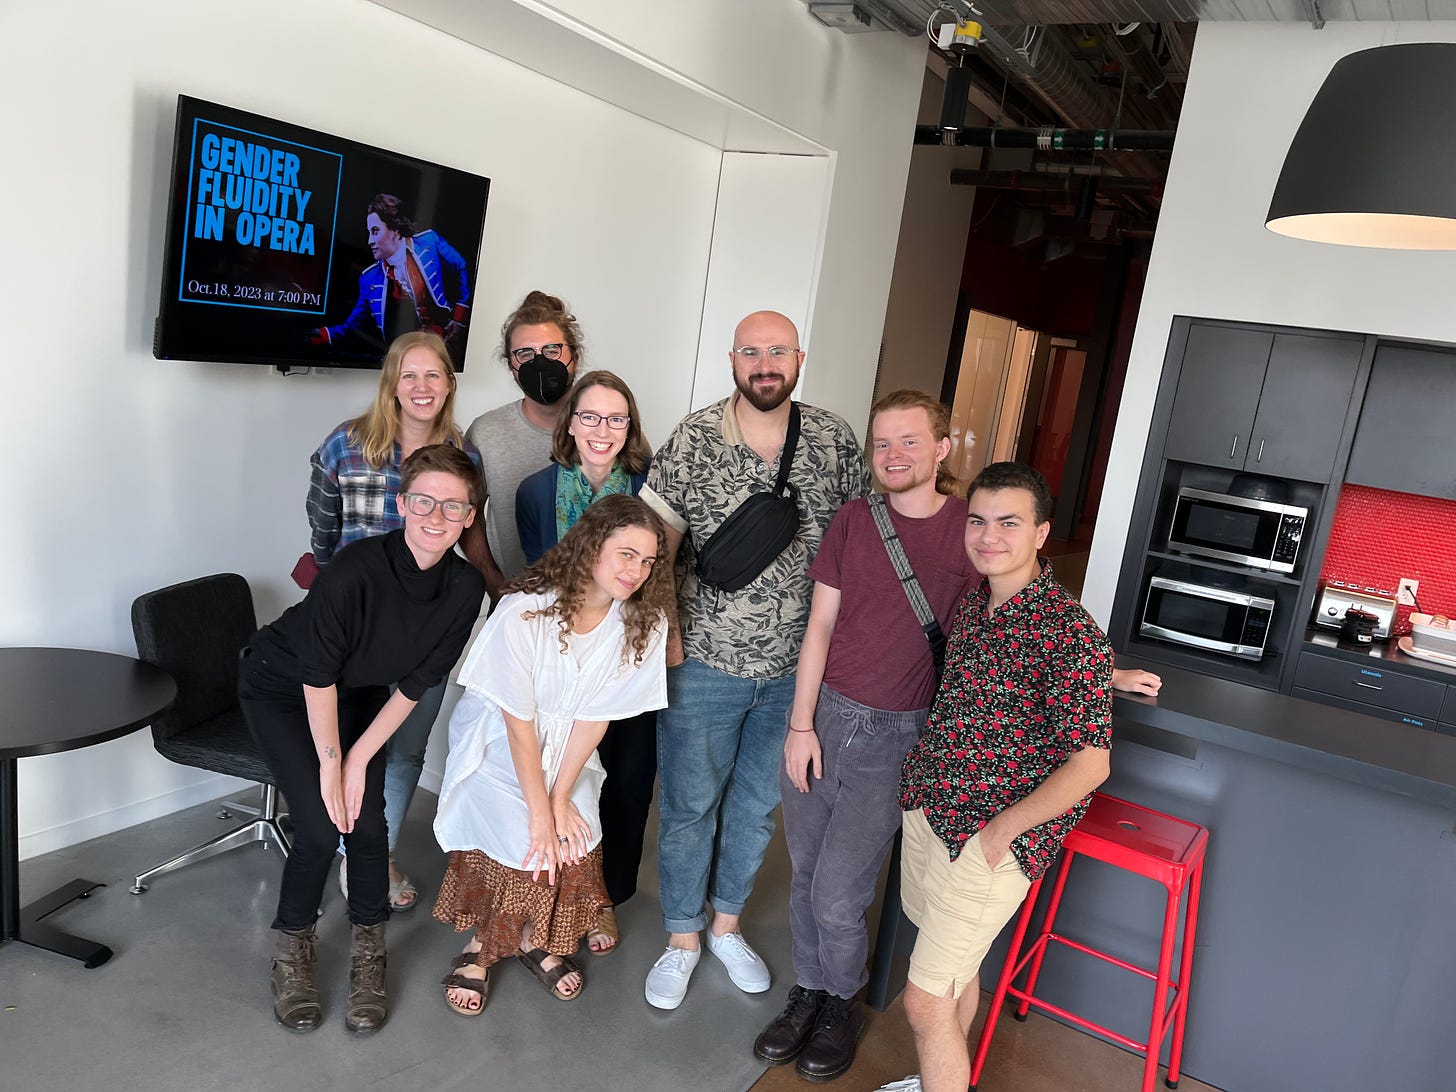 This year’s Creation Lab cohort of composers (C) and librettists (L). Front row: Ozzy Wagner (L), Hannah Schoettmer (L). Back row: Grace Oberhofer (C), Spencer Young (L), Mina Pariseau (Esary) (C), me (C), Mike Powers (C), Mateo Acuña (L).